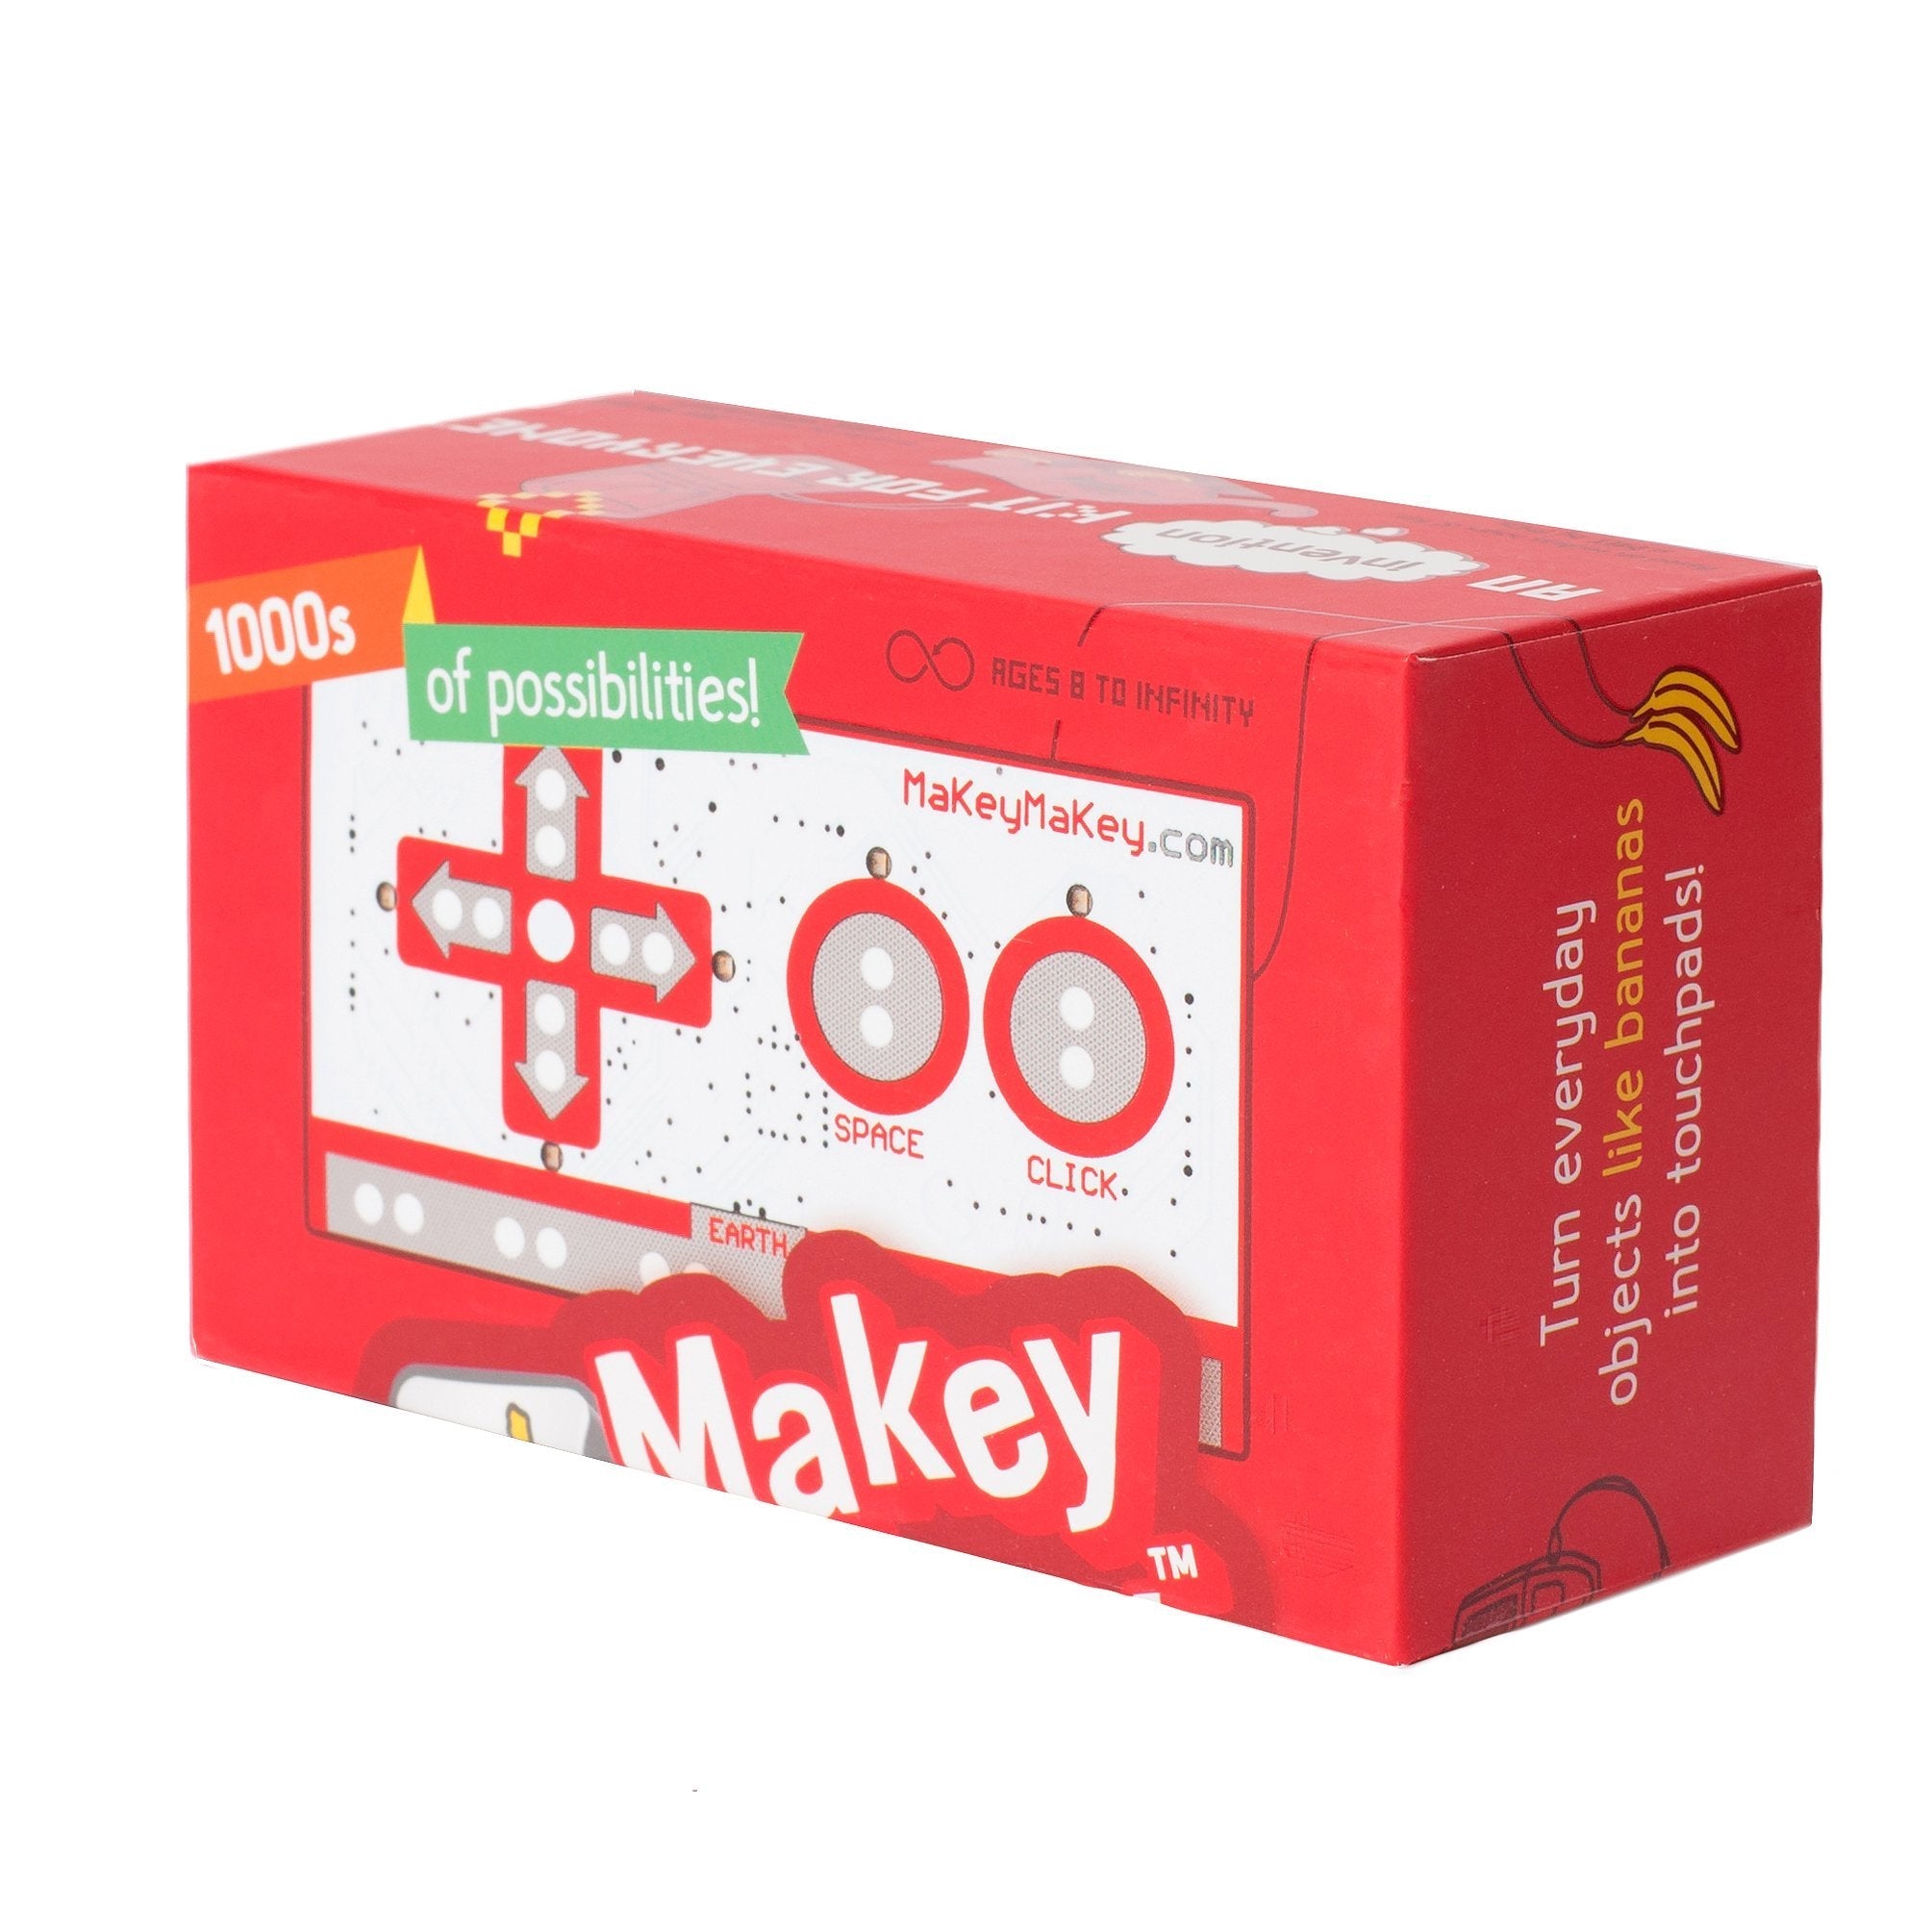 Makey Makey STEM Pack Classroom Invention Literacy Kit from JoyLabz -  Hands-on Technology Learning Fun - Science Education - 1000s of Engineering  and